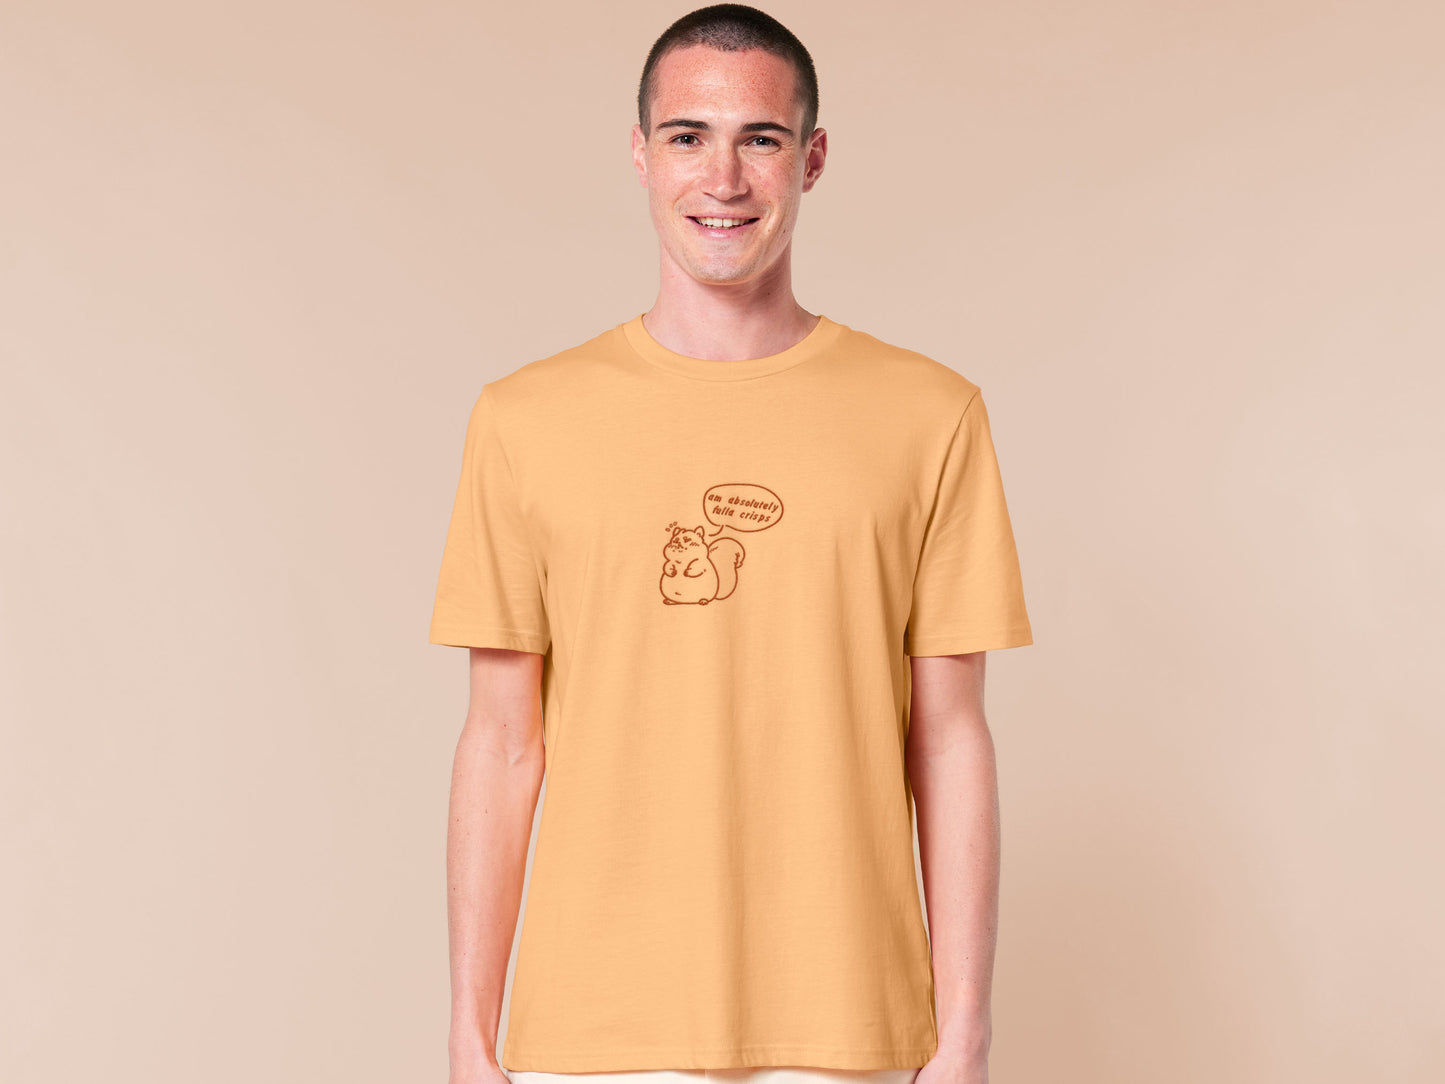 A man wearing a short sleeved yellow t-shirt with an embroidered design of a cute fat squirrel and a speech bubble with the text am absolutely fulla crisps